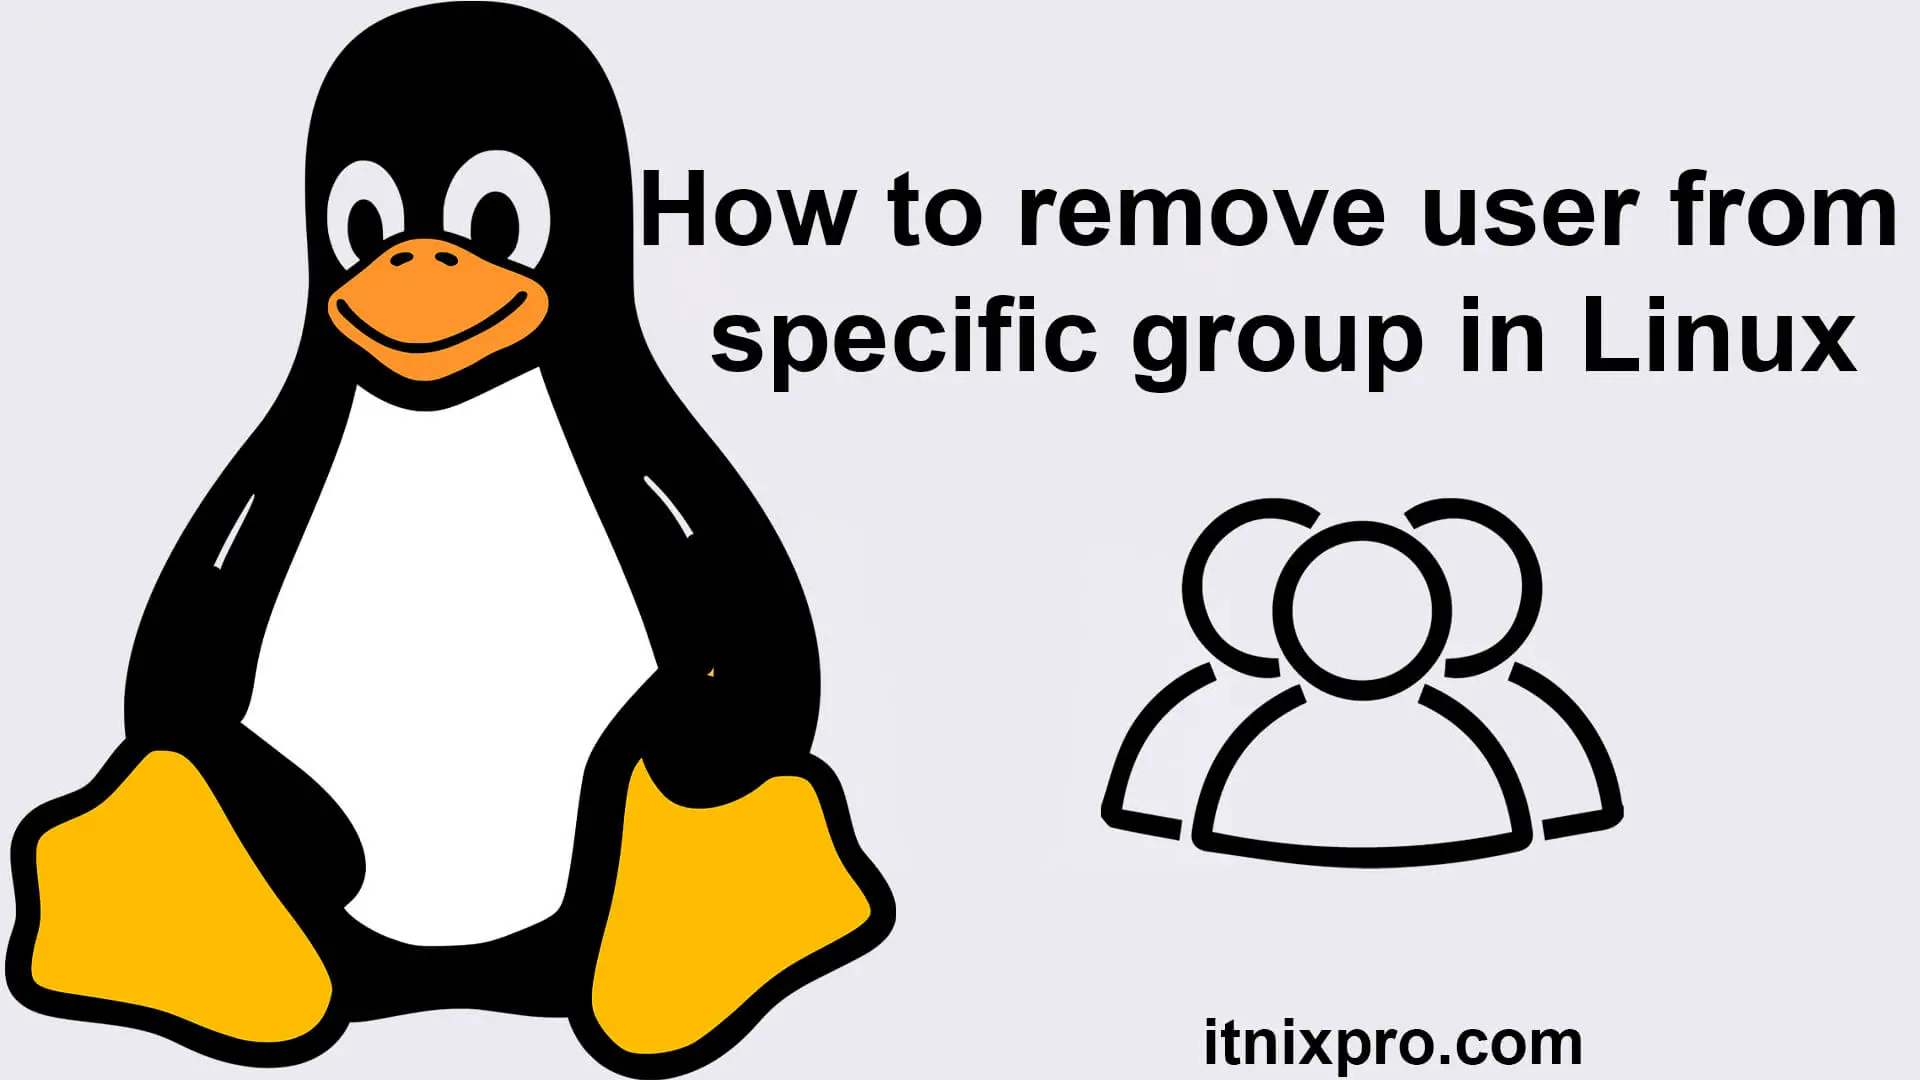 How to remove user from specific group in Linux